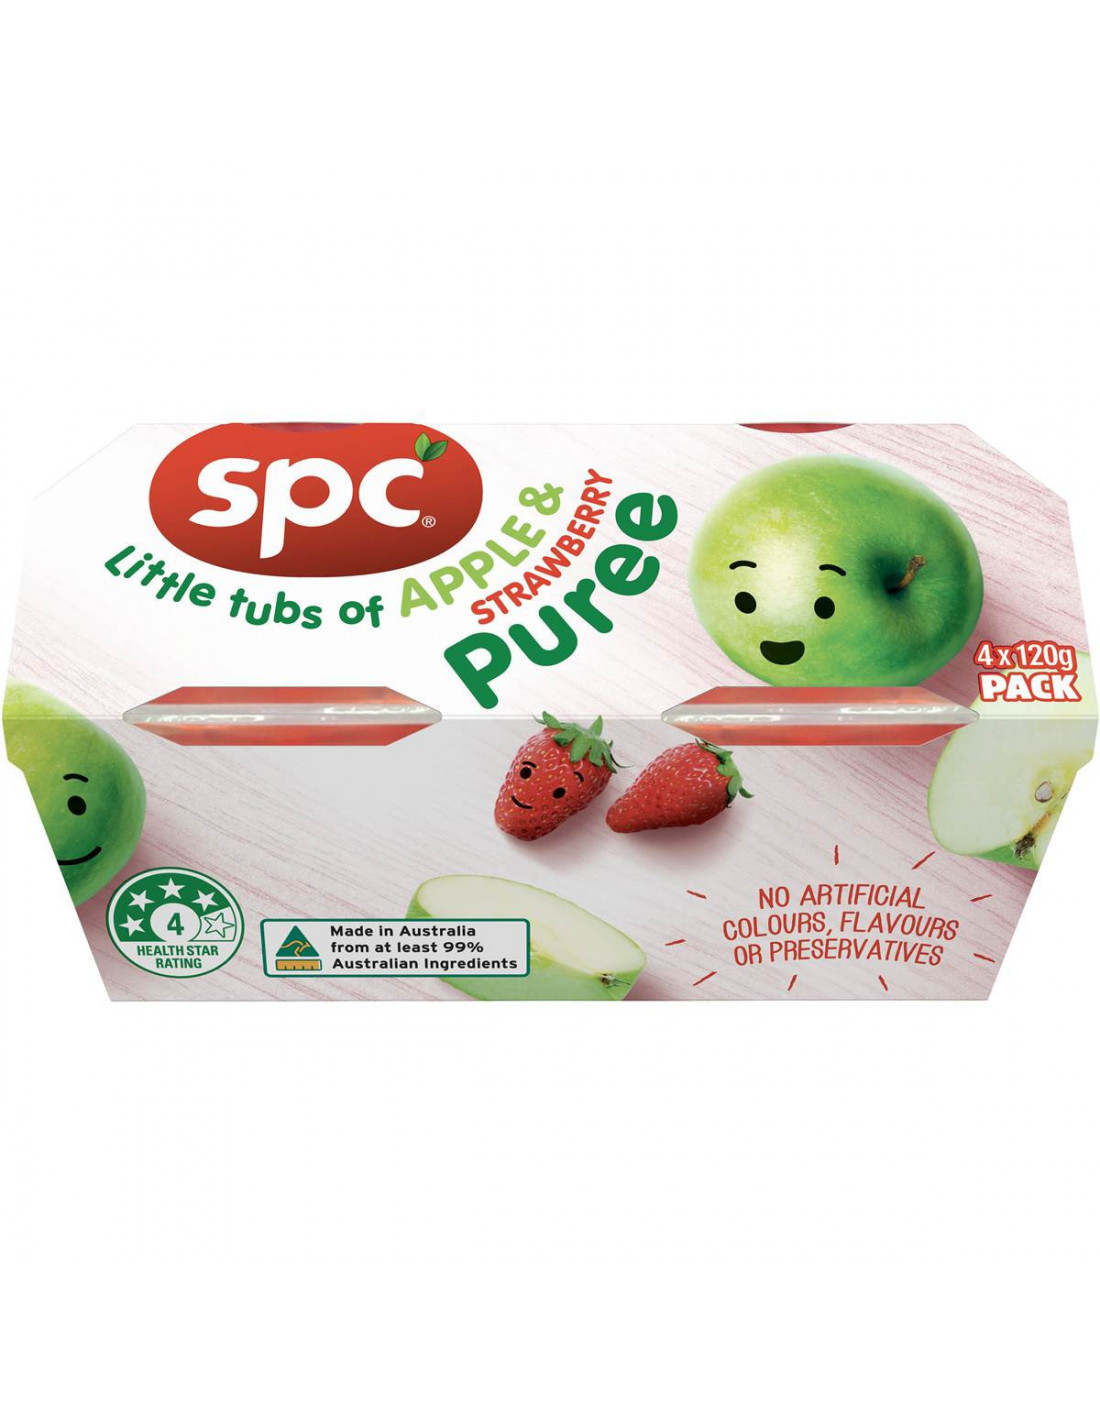 Spc Apple Strawberry Puree 4pk 480g | Ally's Basket - Direct from A...